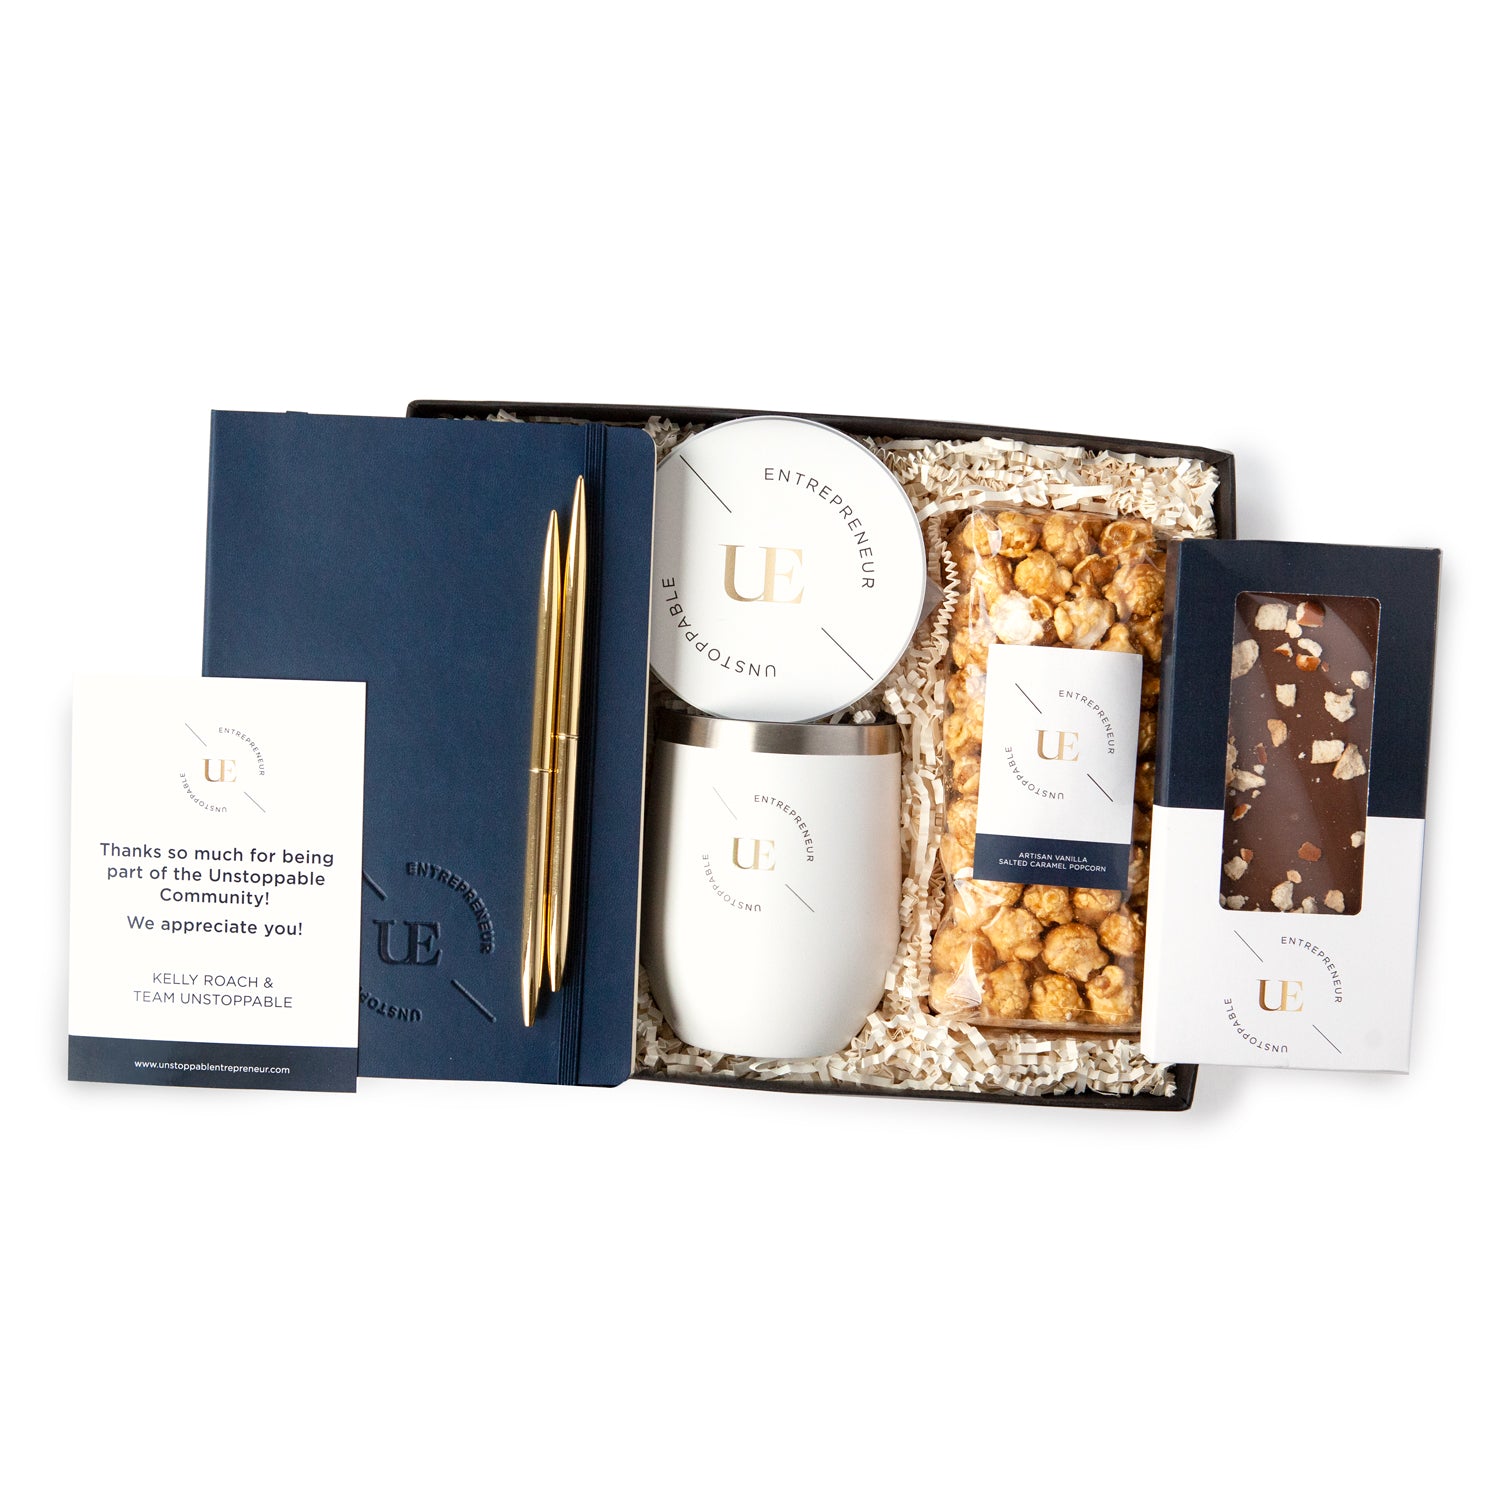 Corporate Gift Ideas Archives - Siegel's Corporate Gifts